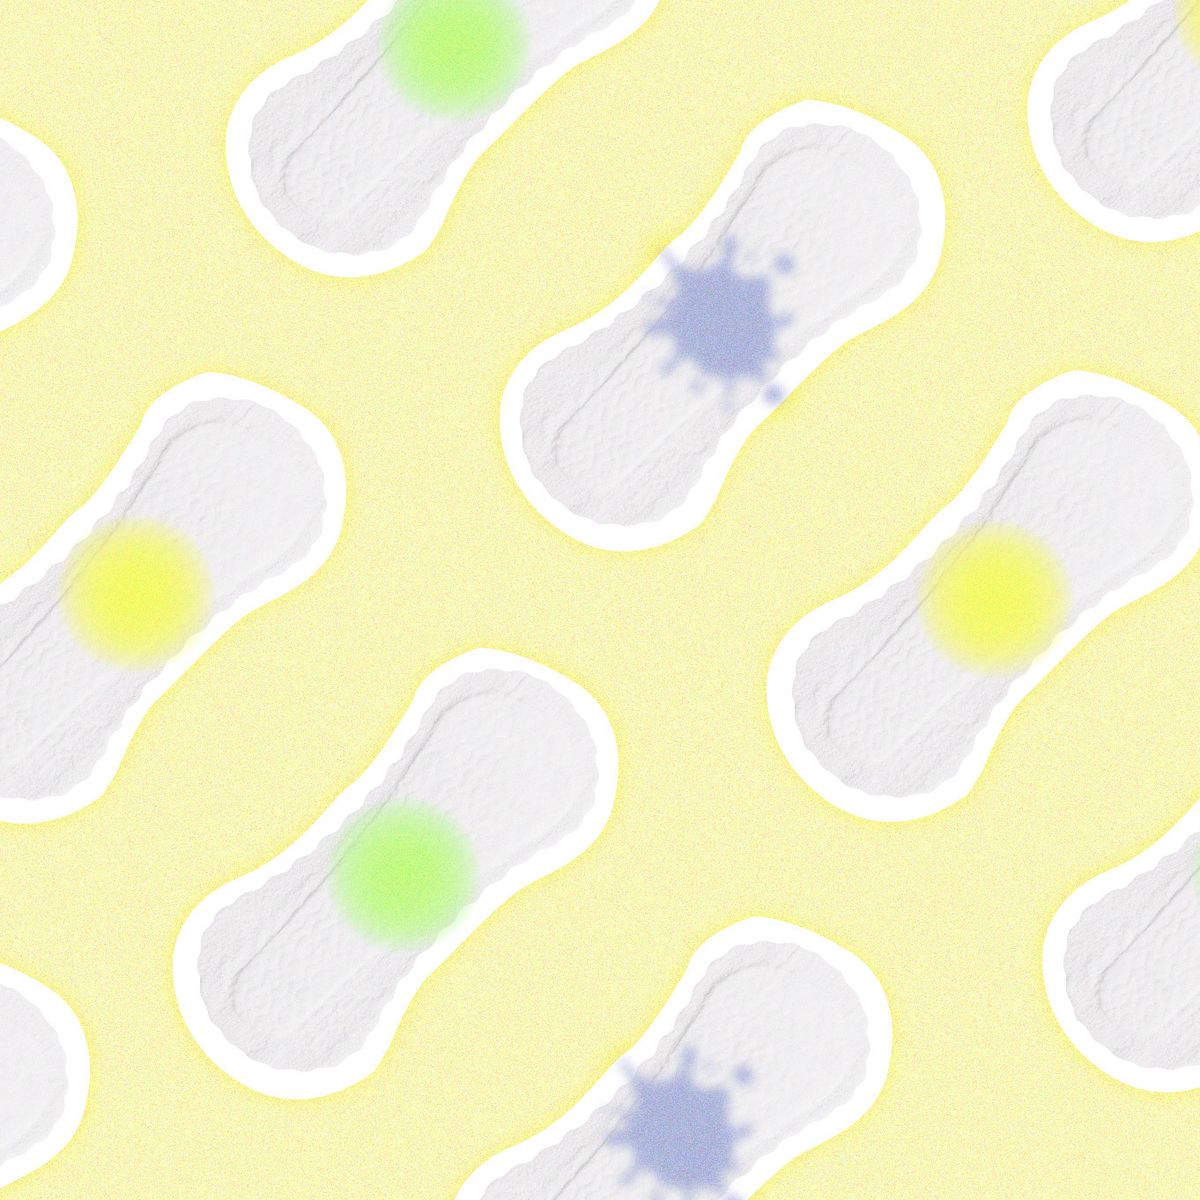 8 feminine hygiene tips we want all women everywhere to learn for a happy  vagina